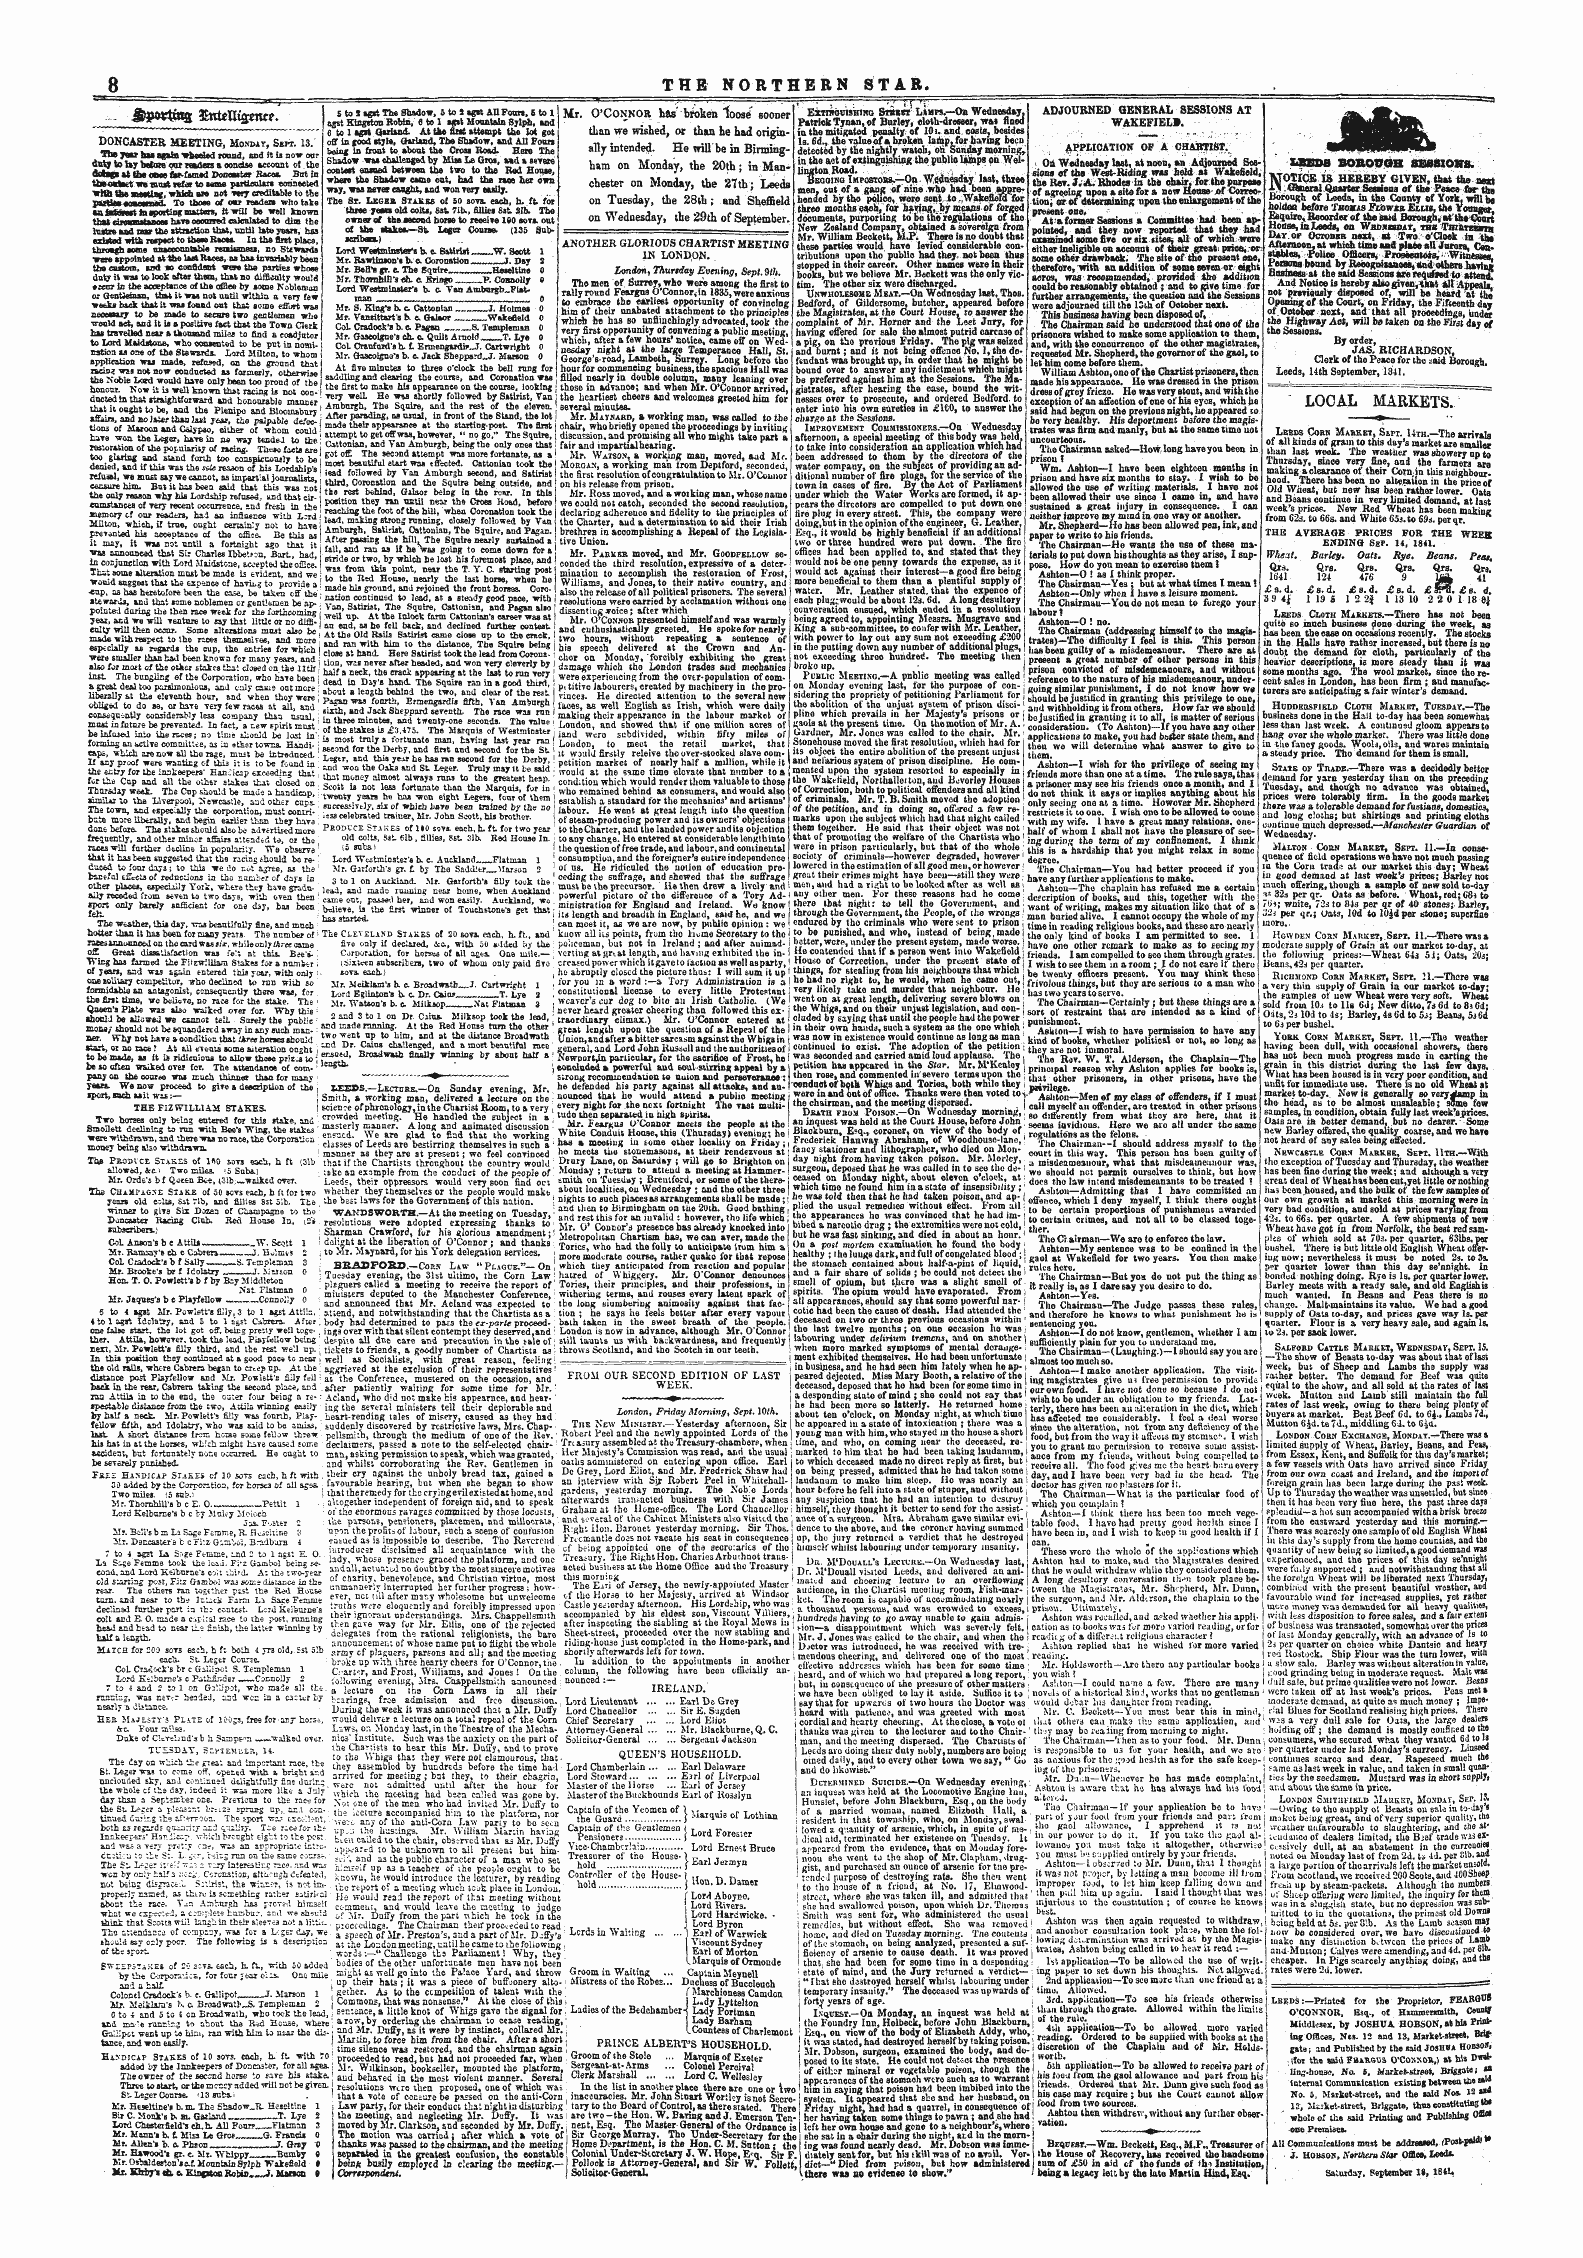 Northern Star 1837 1852 18th September 1841 Edition 1 Of 5 Page 8 From Our Second Edition Of Last Week Nineteenth Century Serials Edition